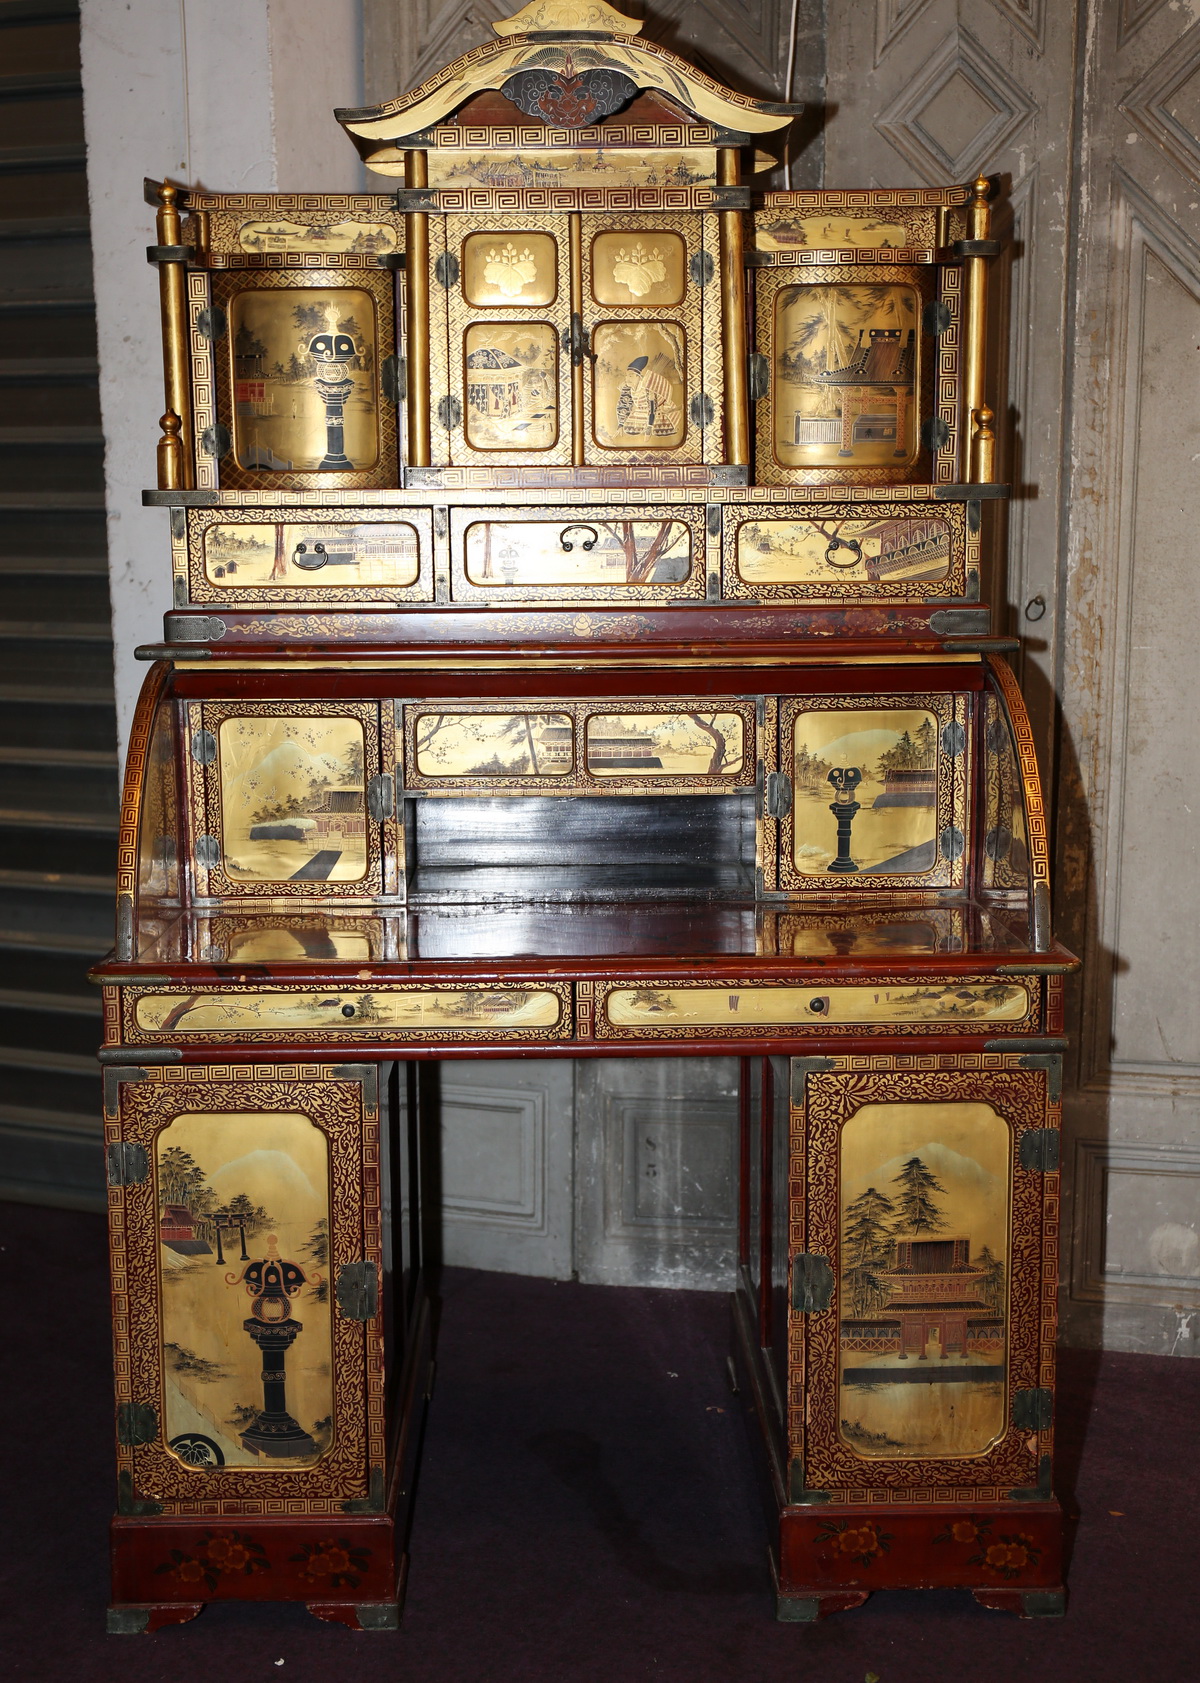 Lacquered desk from Japan circa 1880